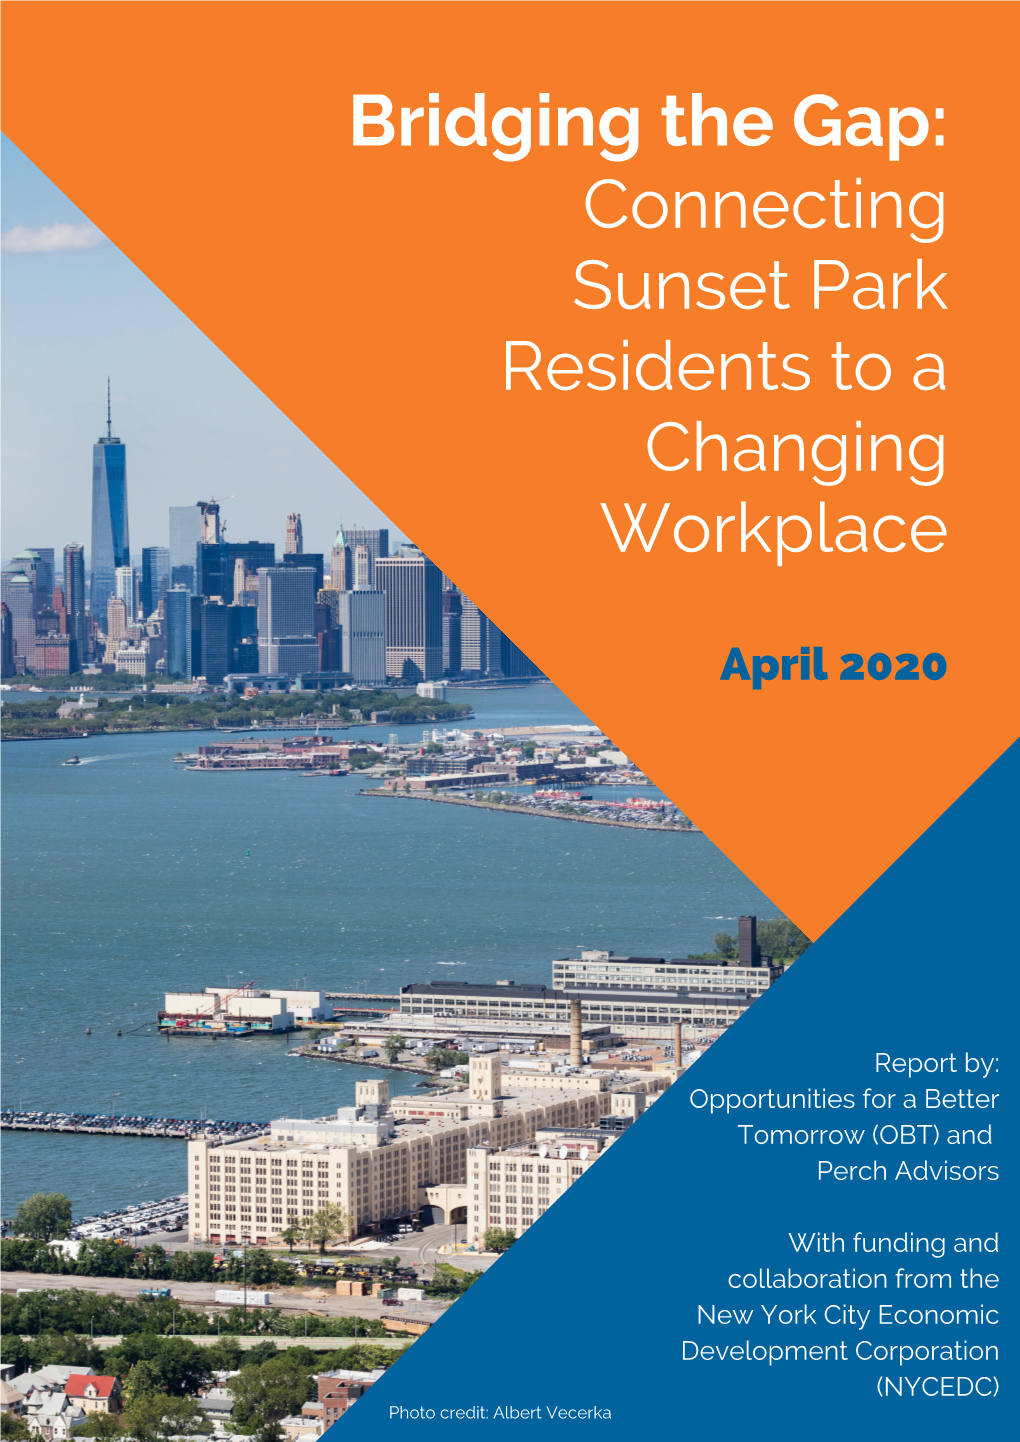 Bridging the Gap: Connecting Sunset Park Residents to a Changing Workplace